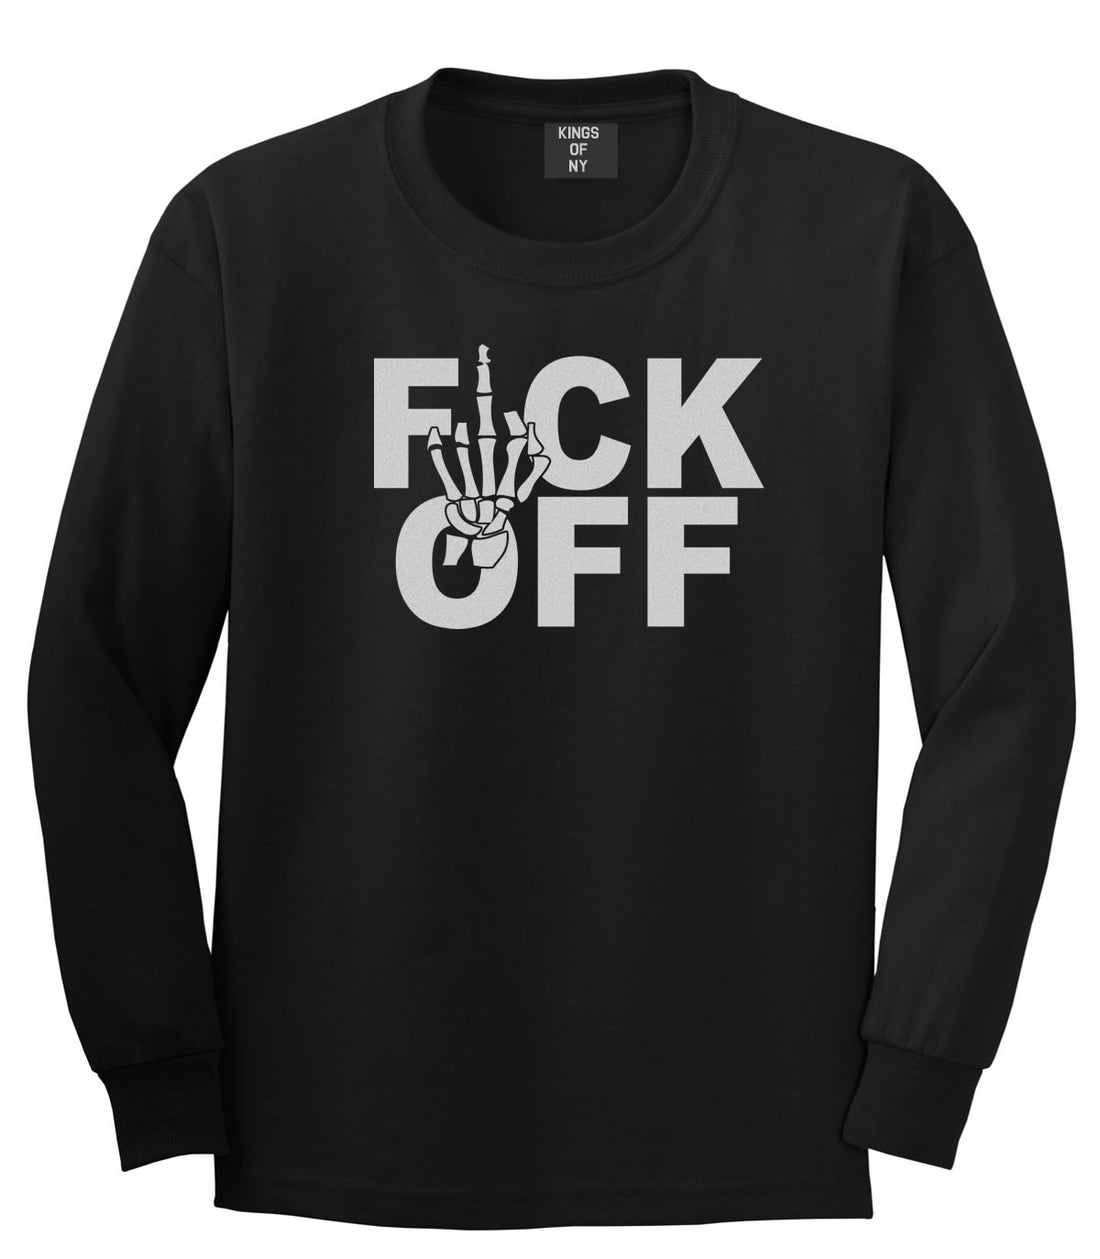 FCK OFF Skeleton Hand Long Sleeve T-Shirt in Black by Kings Of NY